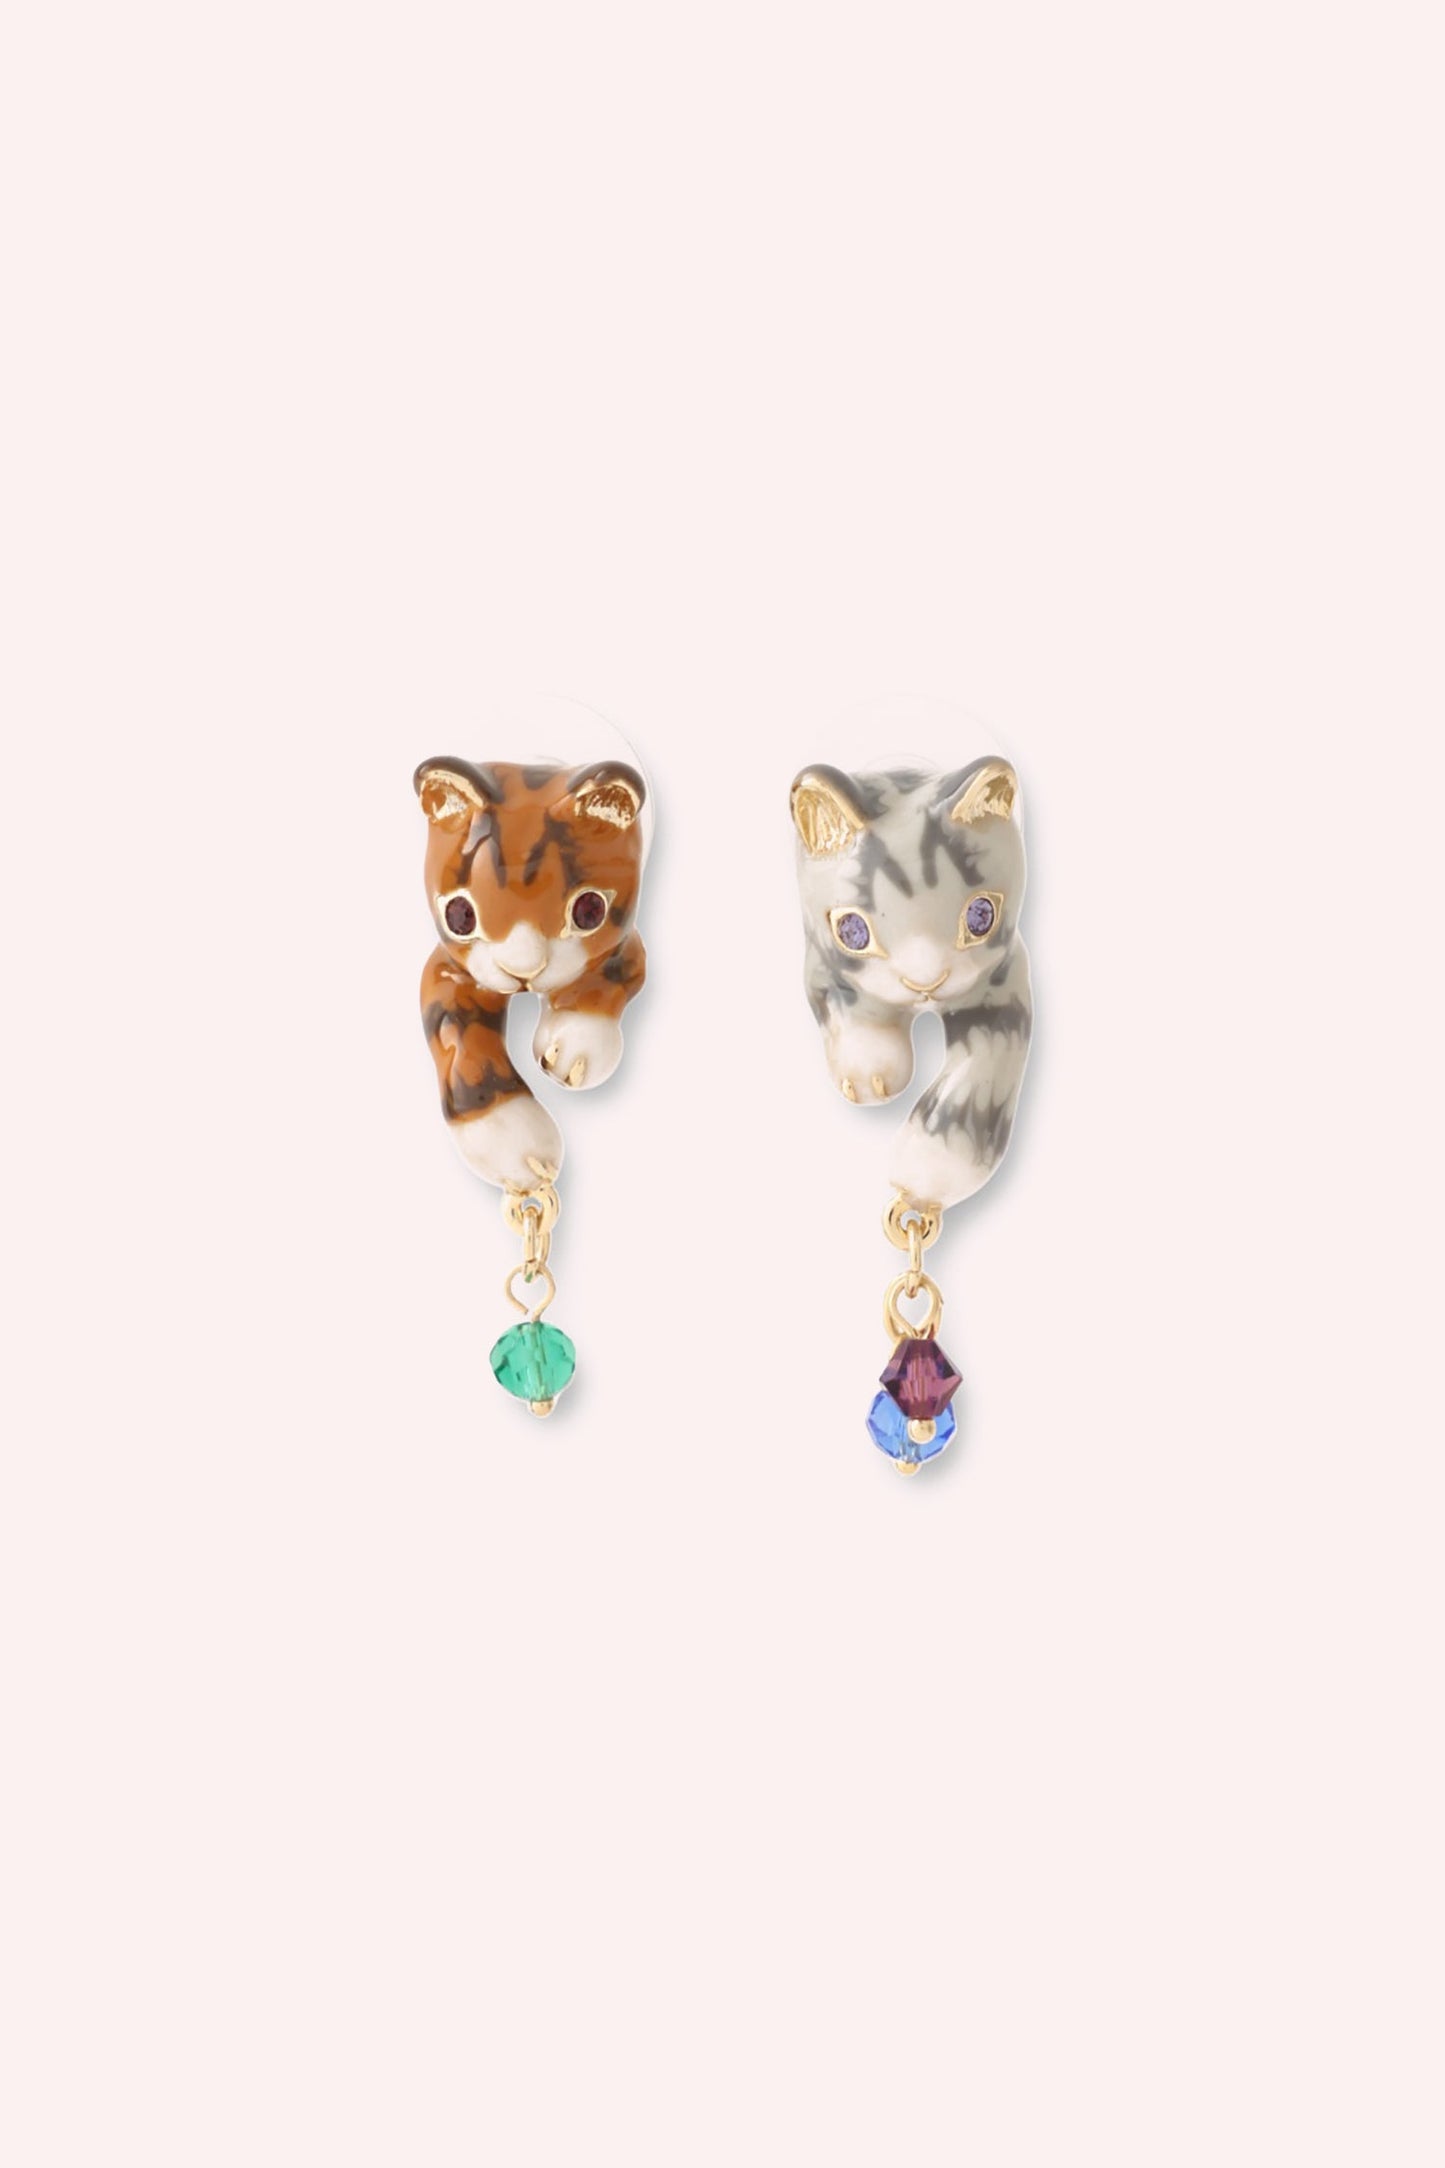 Mismatched Cat Charm Earrings, grey, and brown playful cat with hanging gem green, red blue